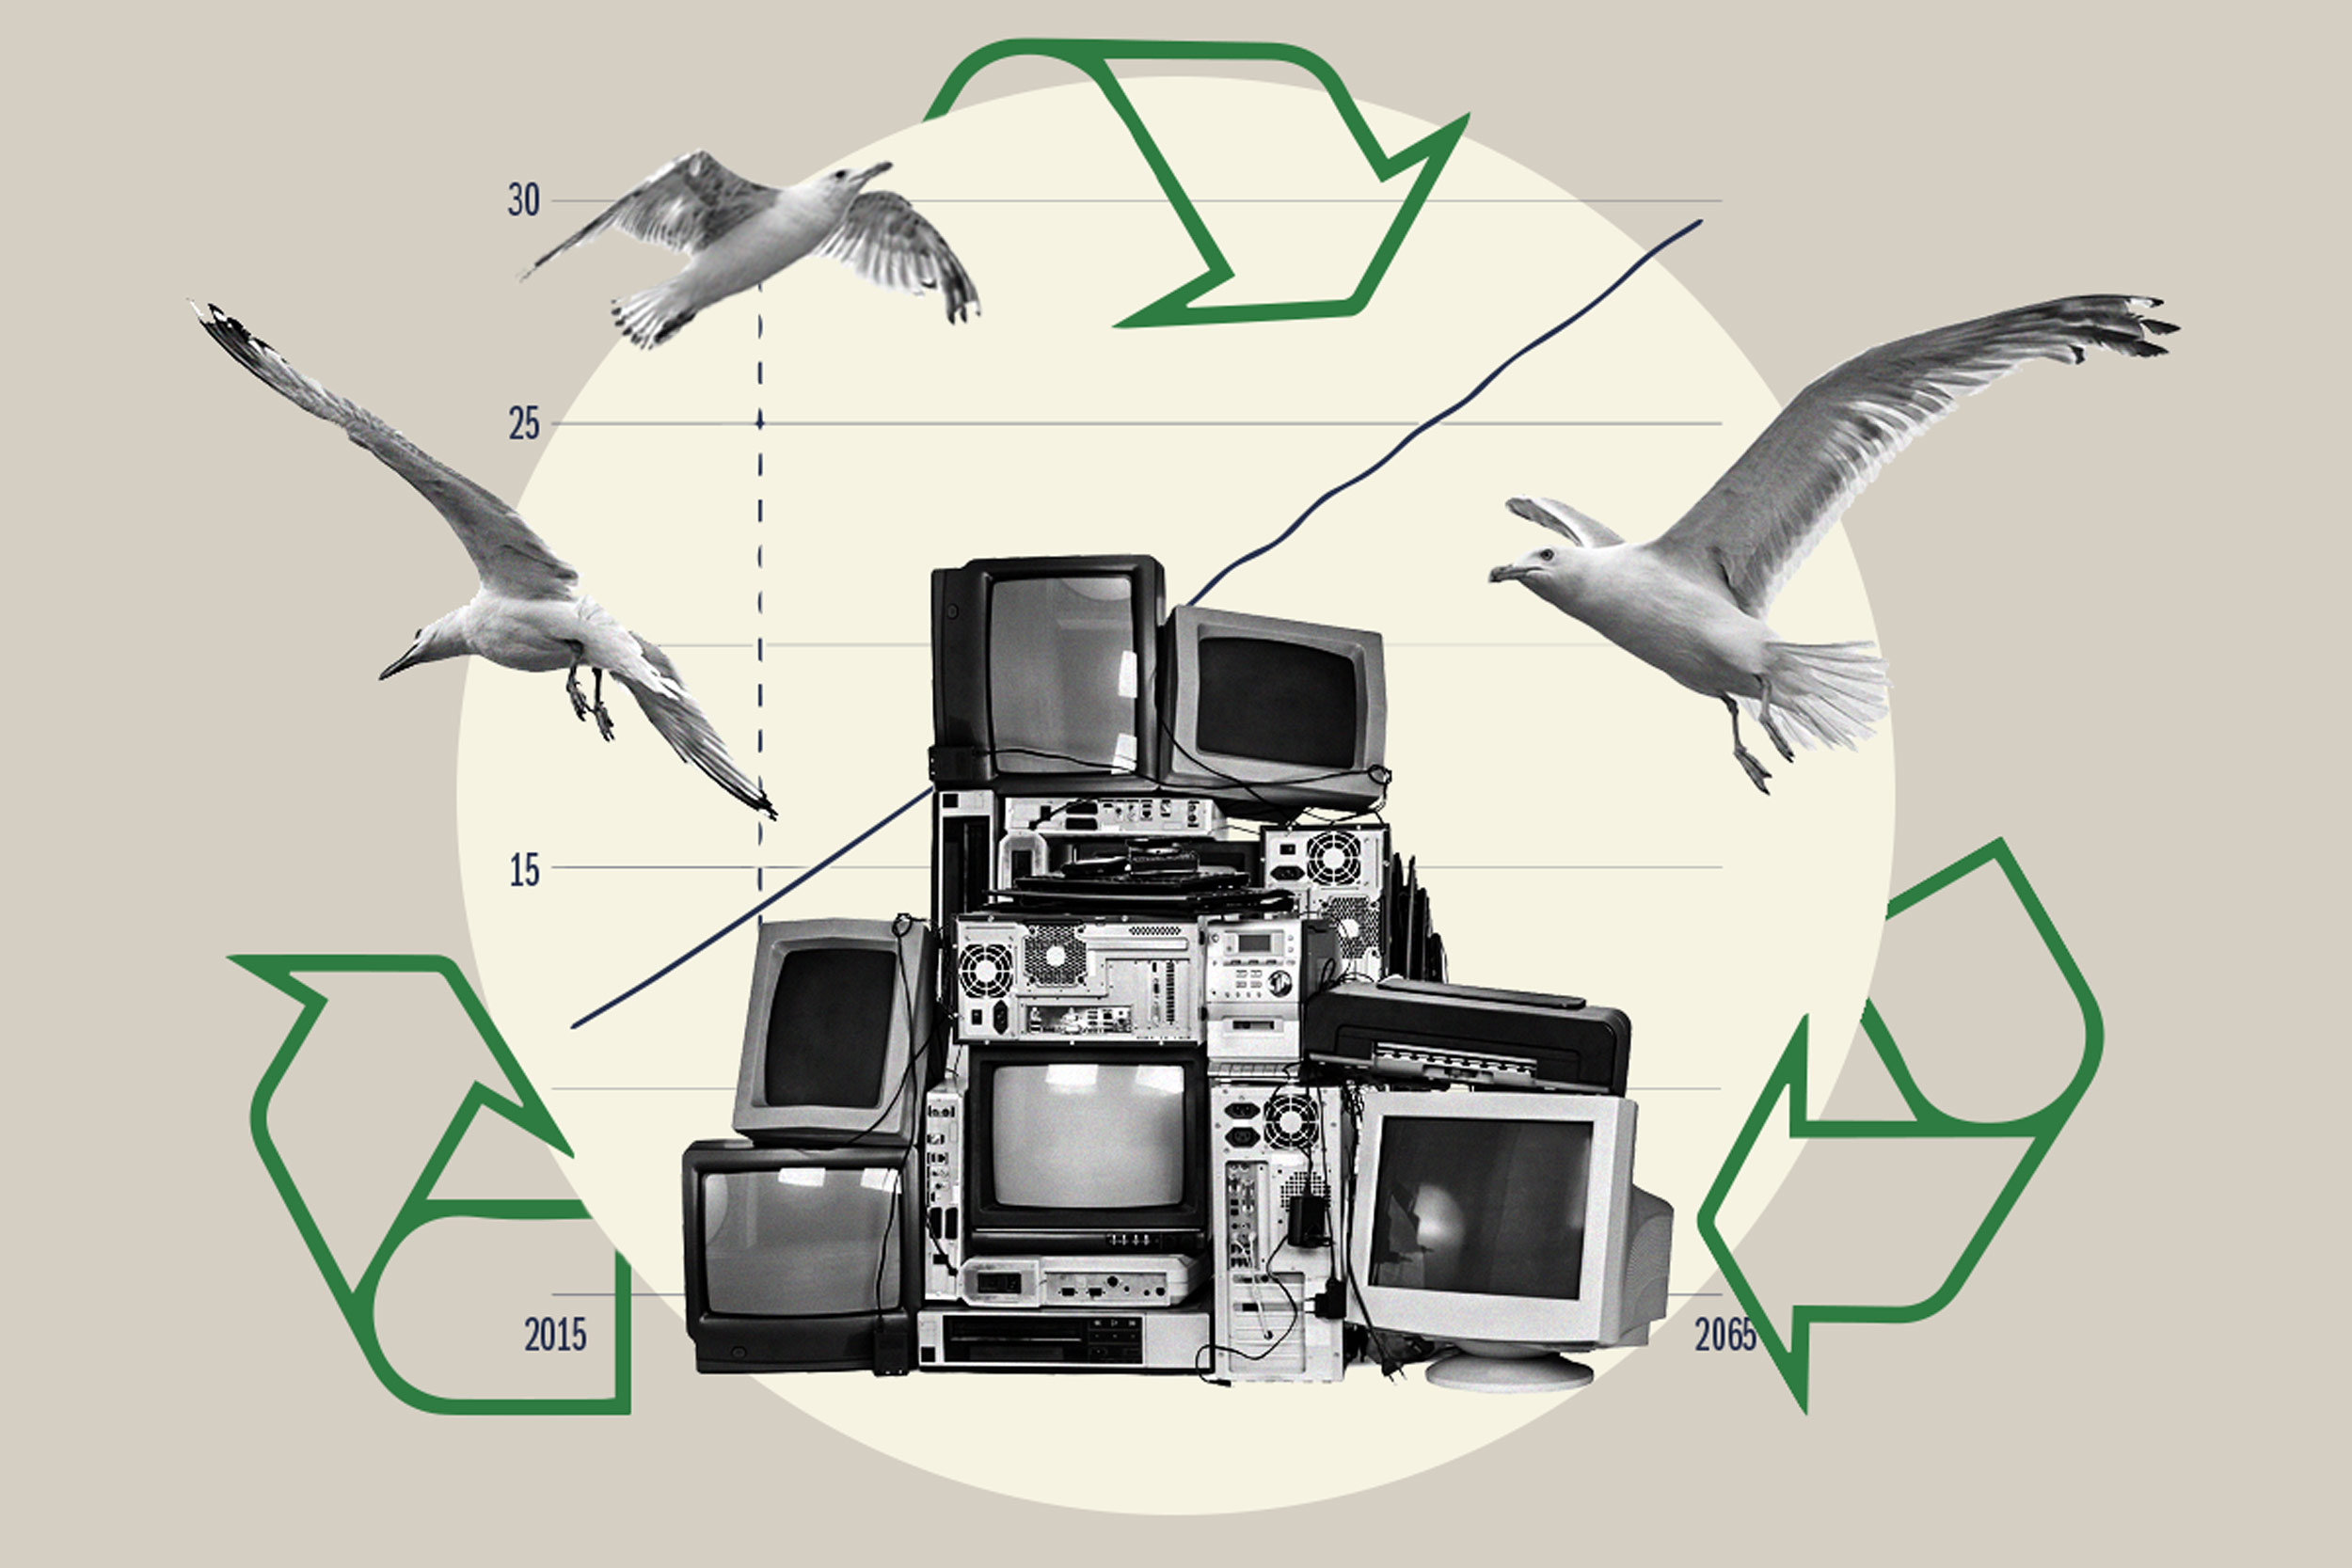 Seagulls fly around a pile of old computers and televisions, on a circle inside the recycling logo